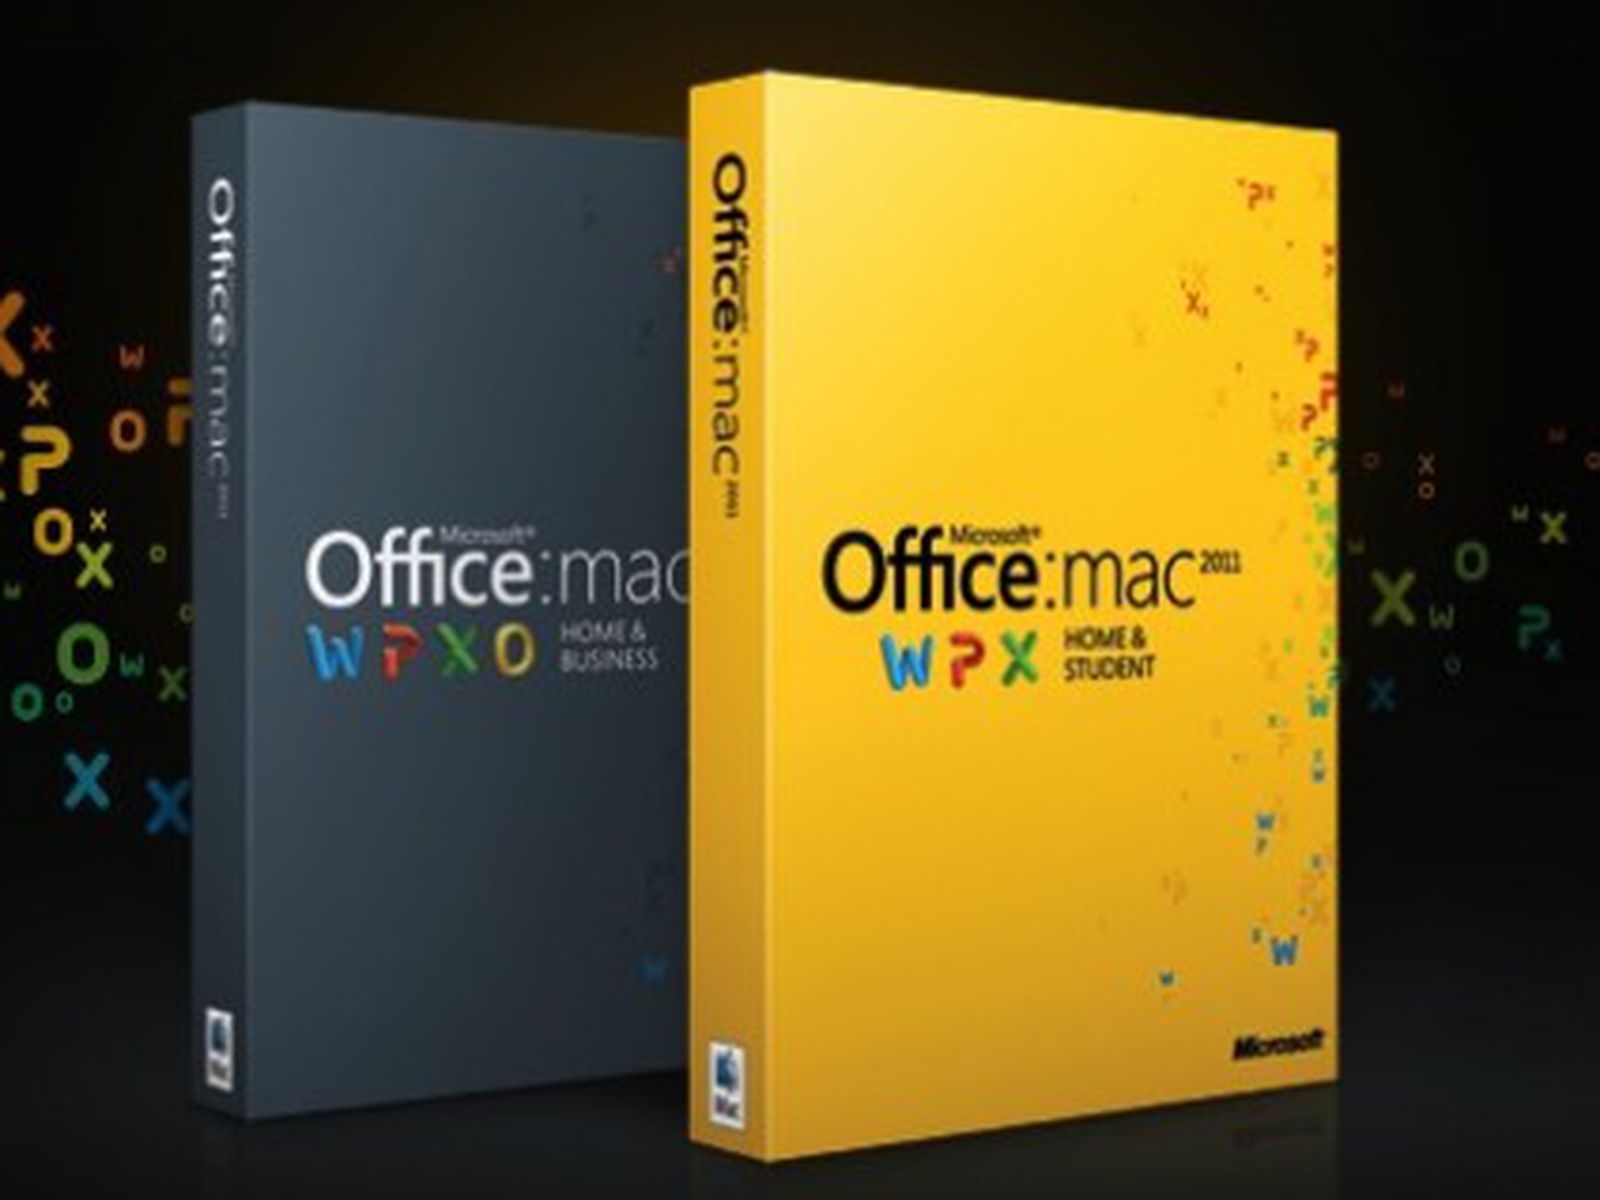 outlook update for mac 2011